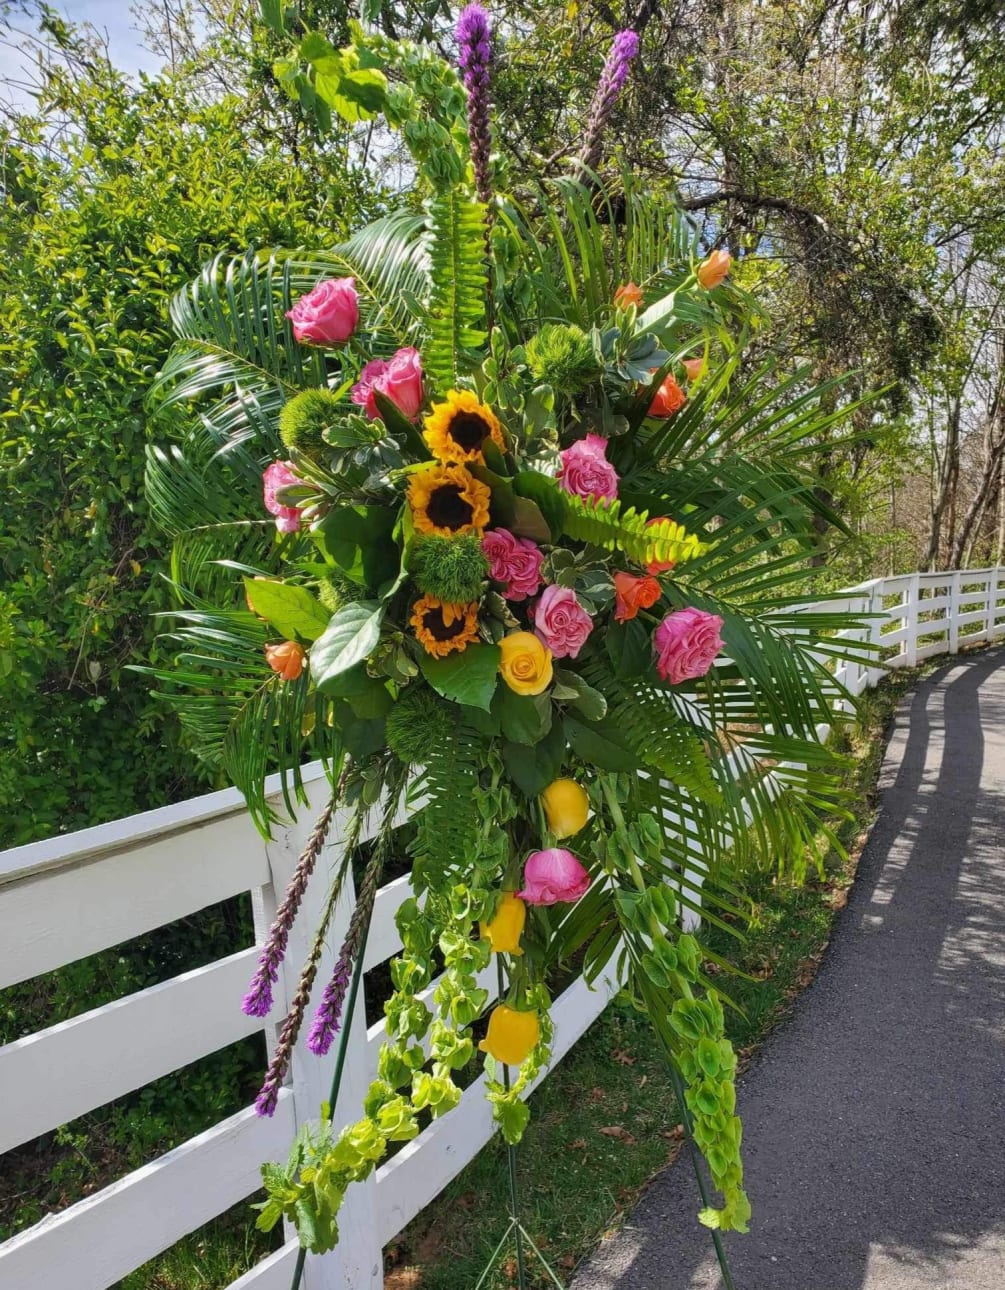 Bringing together Liatris, yellow sunflowers, orange and yellow roses, pink spray roses